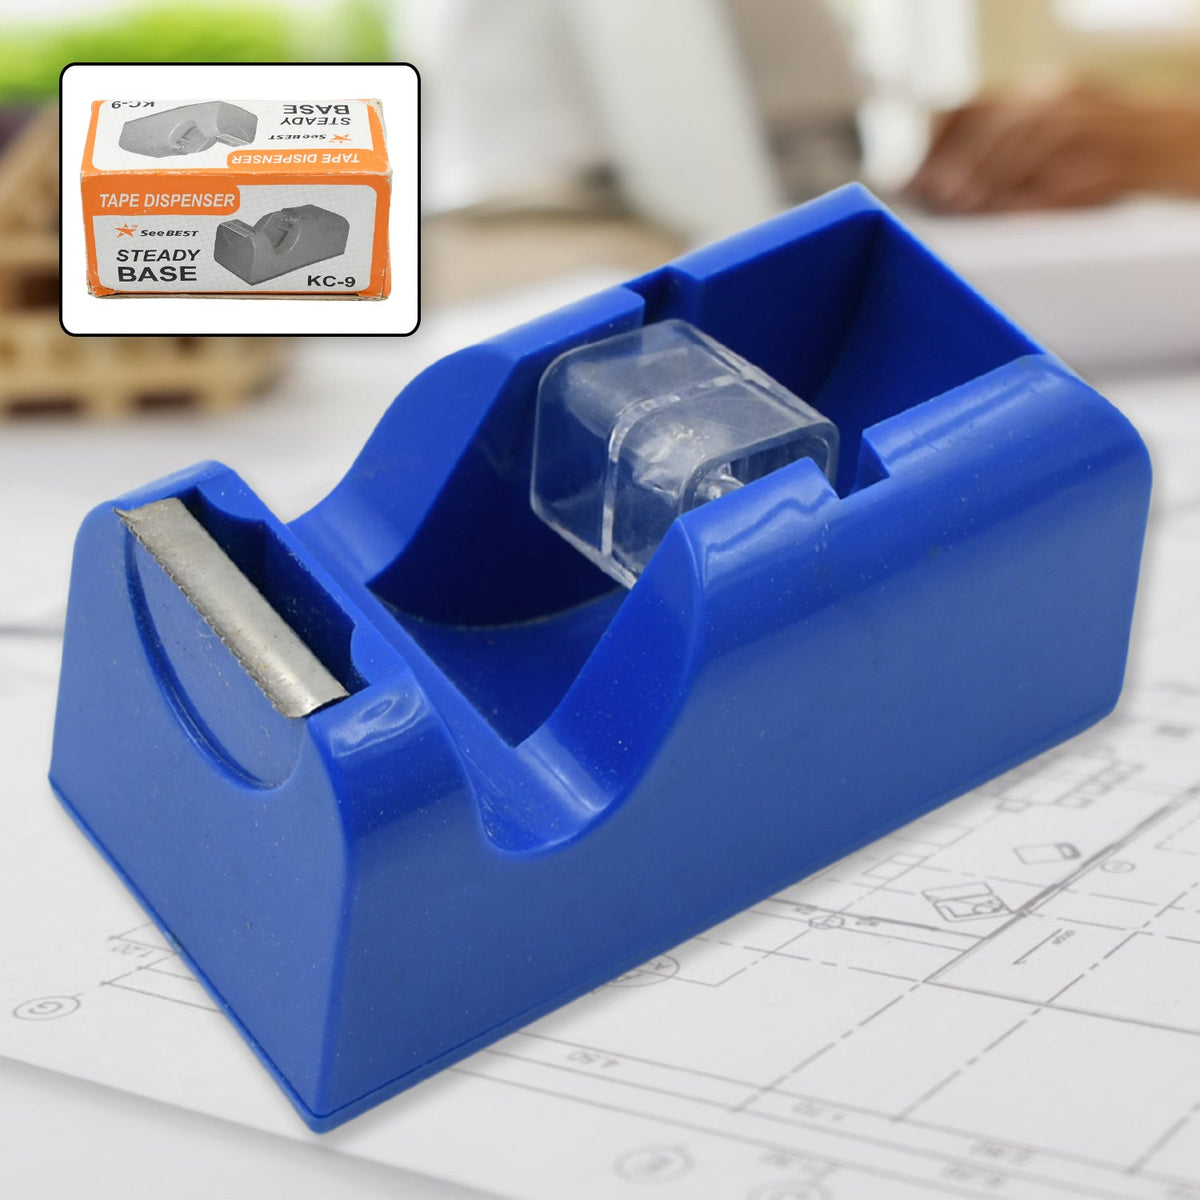 9511 Plastic Tape Dispenser Cutter for Home Office use, Tape Dispenser for Stationary, Tape Cutter Packaging Tape School Supplies (1 pc / 235 Gm)